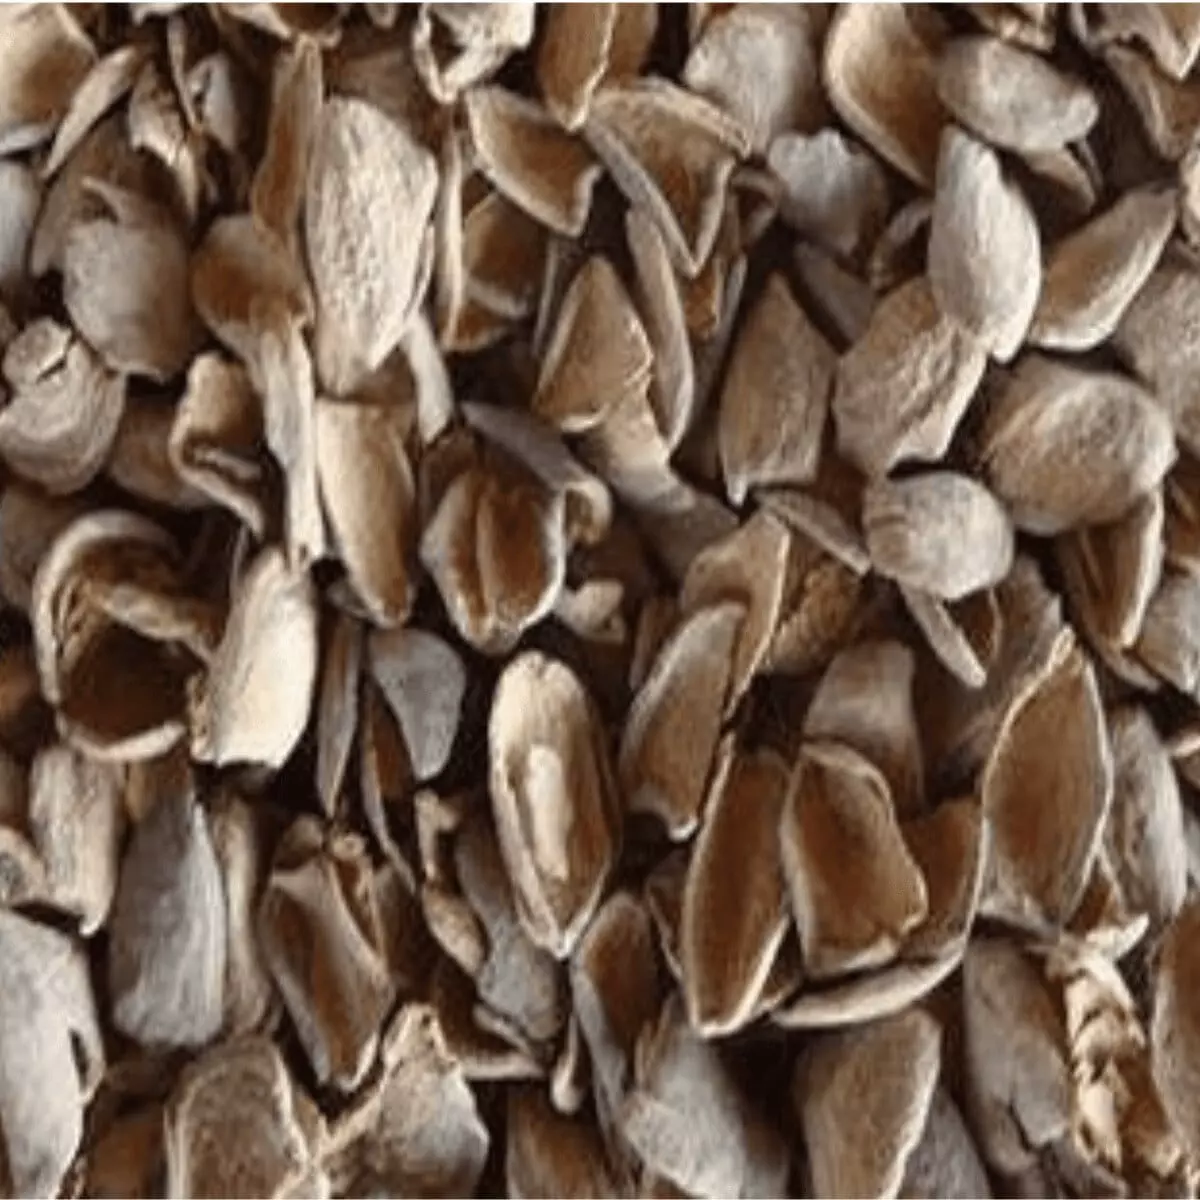 Groundnut Shells at Best Price in India